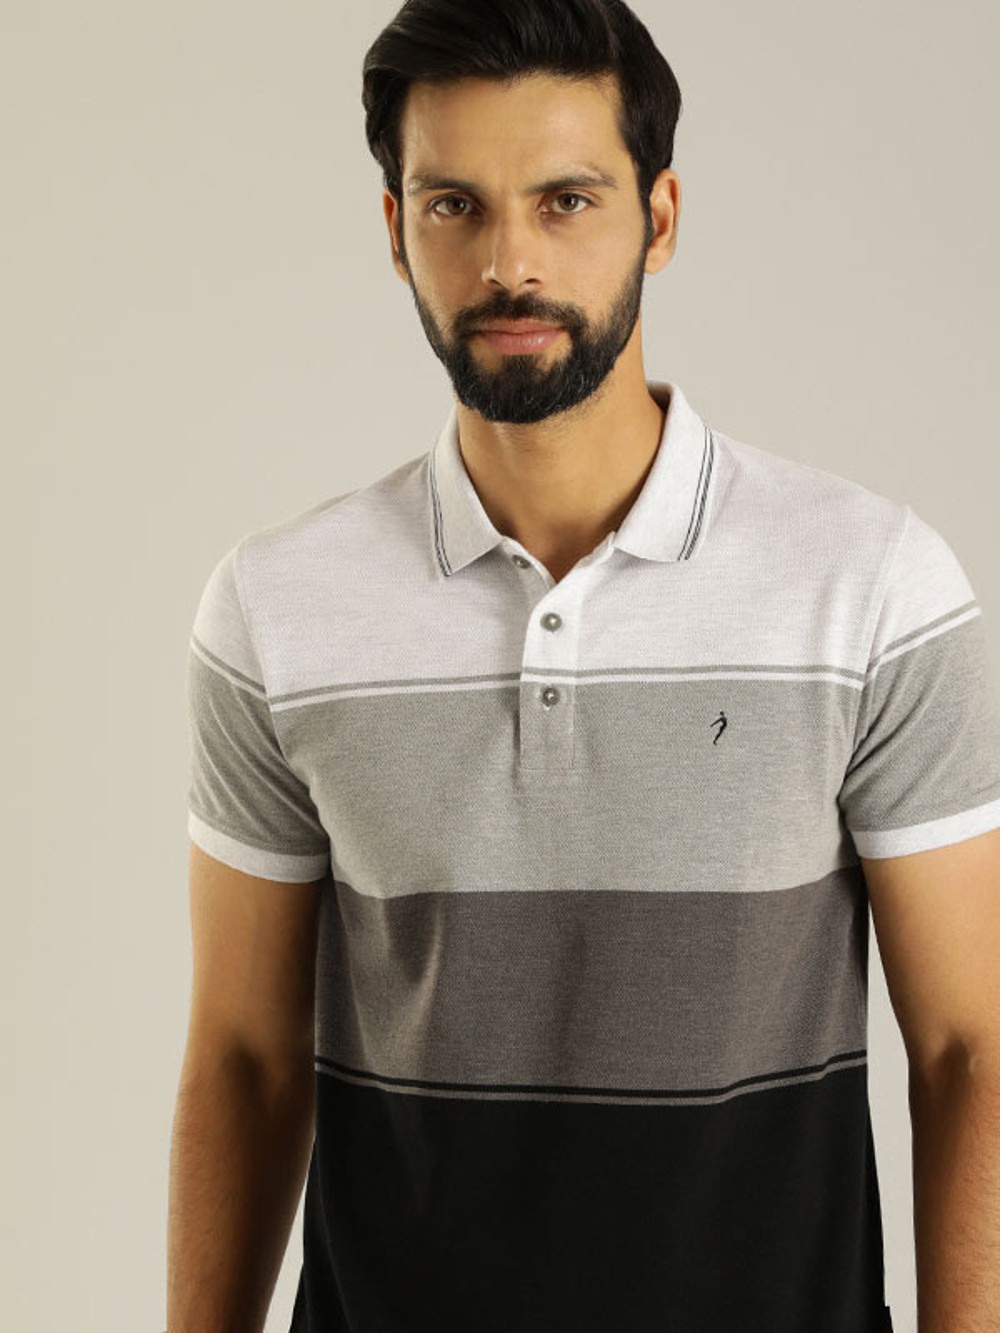 Polo T-Shirts for Men - Buy Mens Polo T-shirt Online